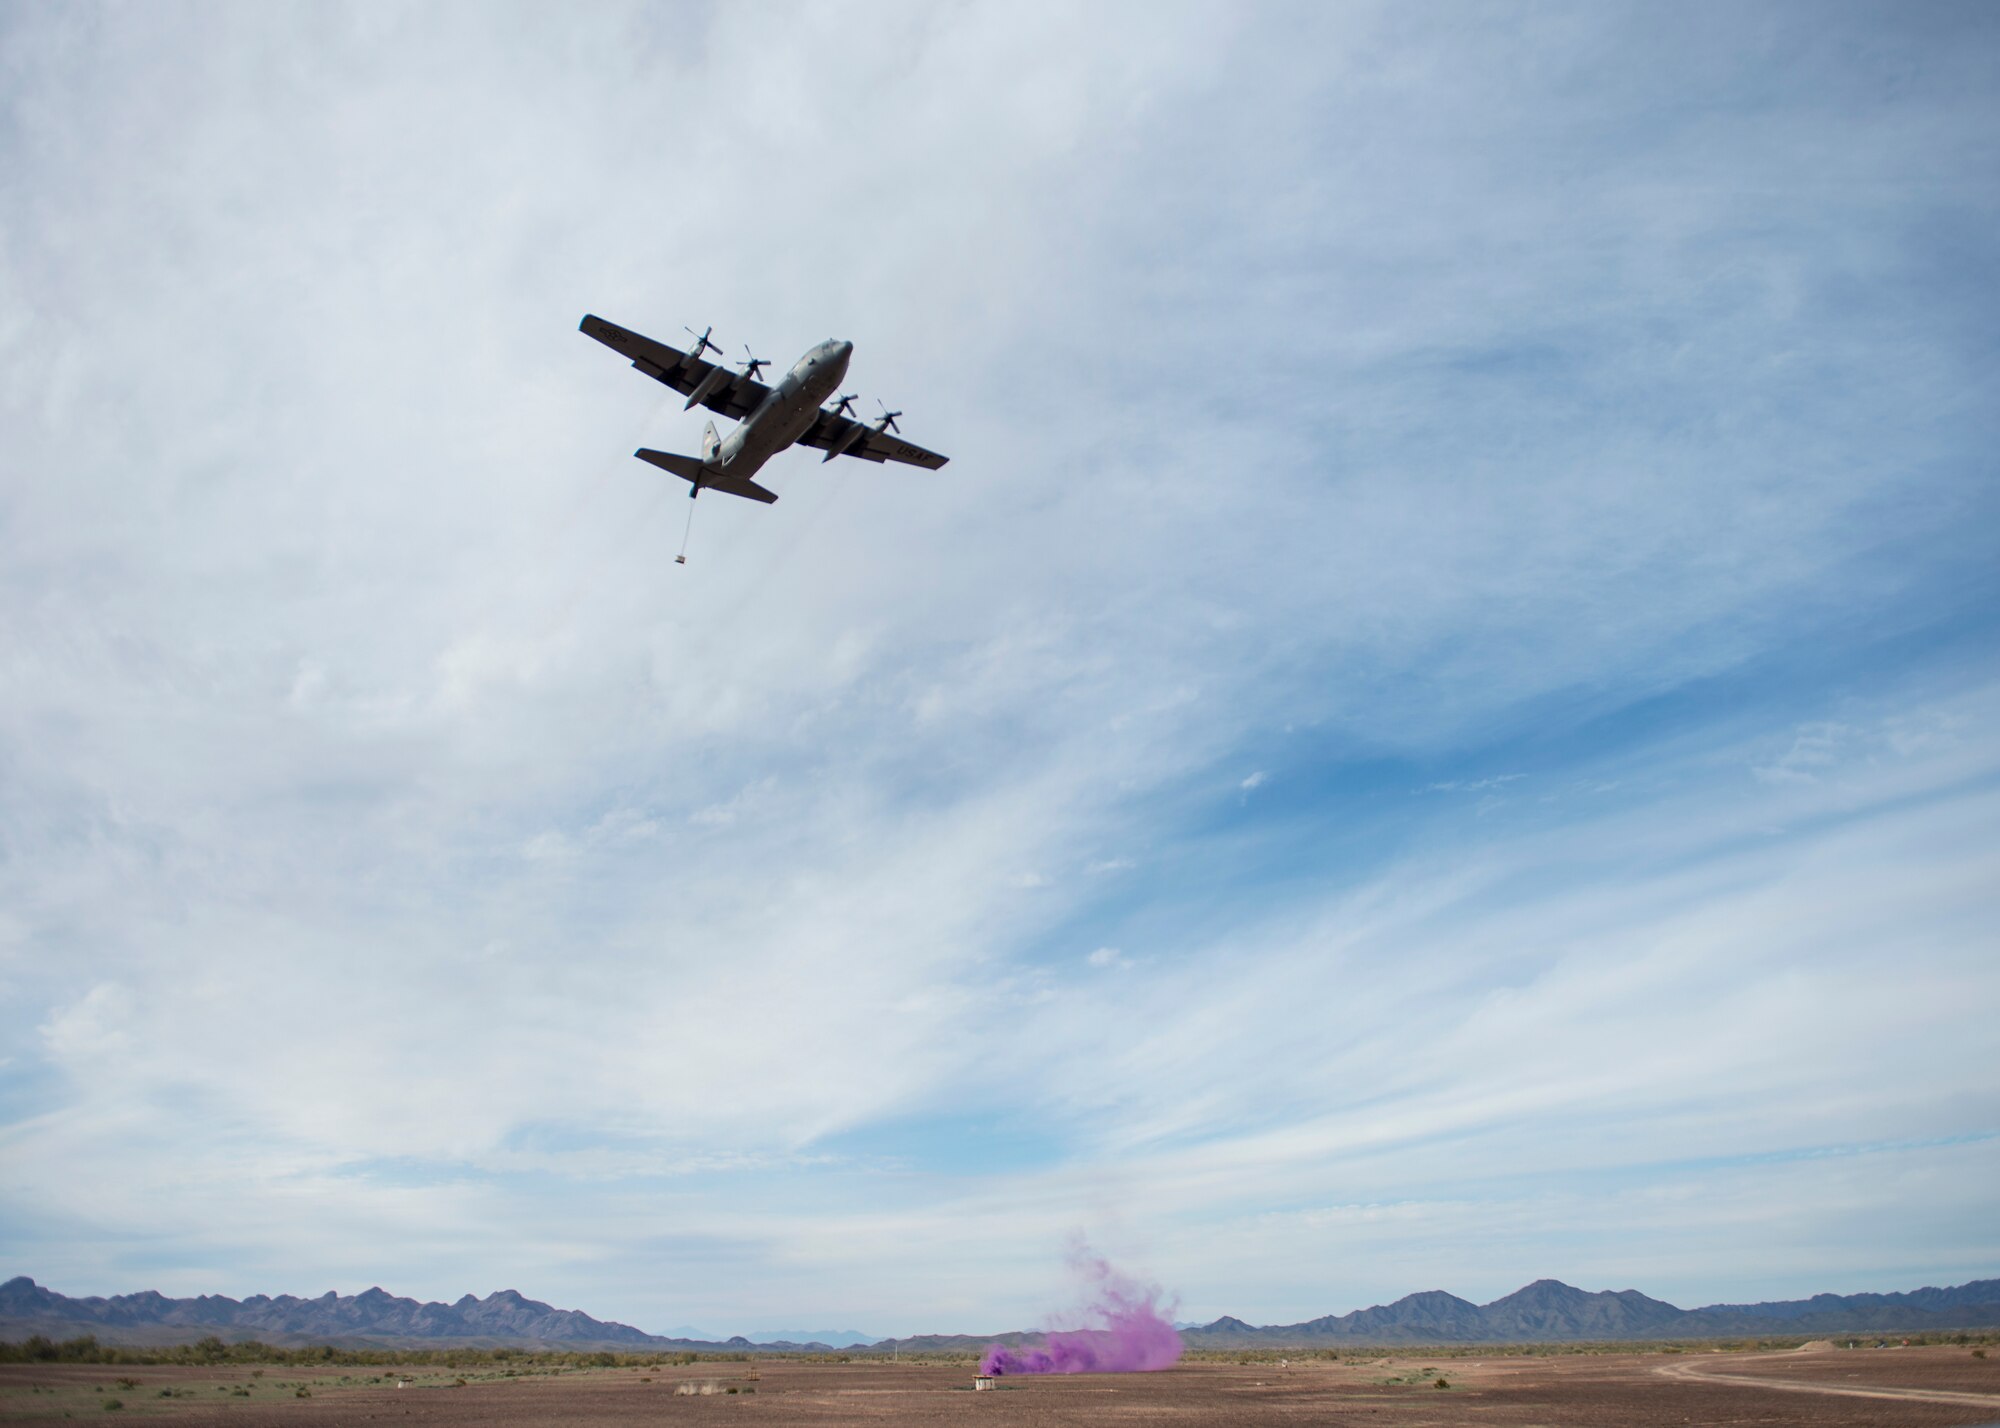 A C-130 Hercules from the 133rd Airlift Wing airdrops a Containerized Delivery System (CDS) over the Yuma Proving Grounds, Ariz. Feb. 26, 2019.